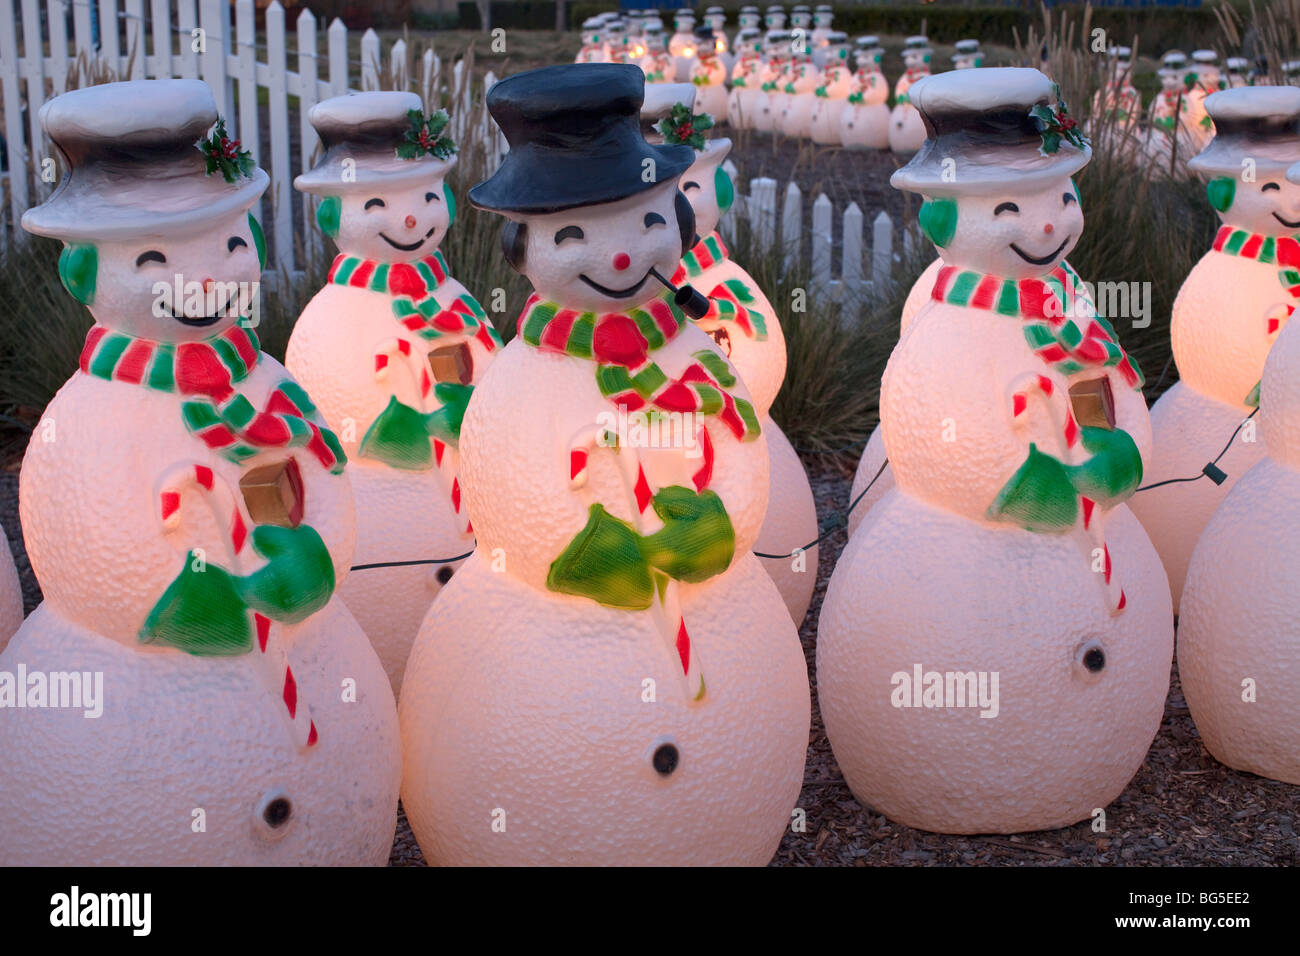 https://c8.alamy.com/comp/BG5EE2/lighted-snowmen-on-parade-with-picket-fence-in-background-at-cornerstone-BG5EE2.jpg